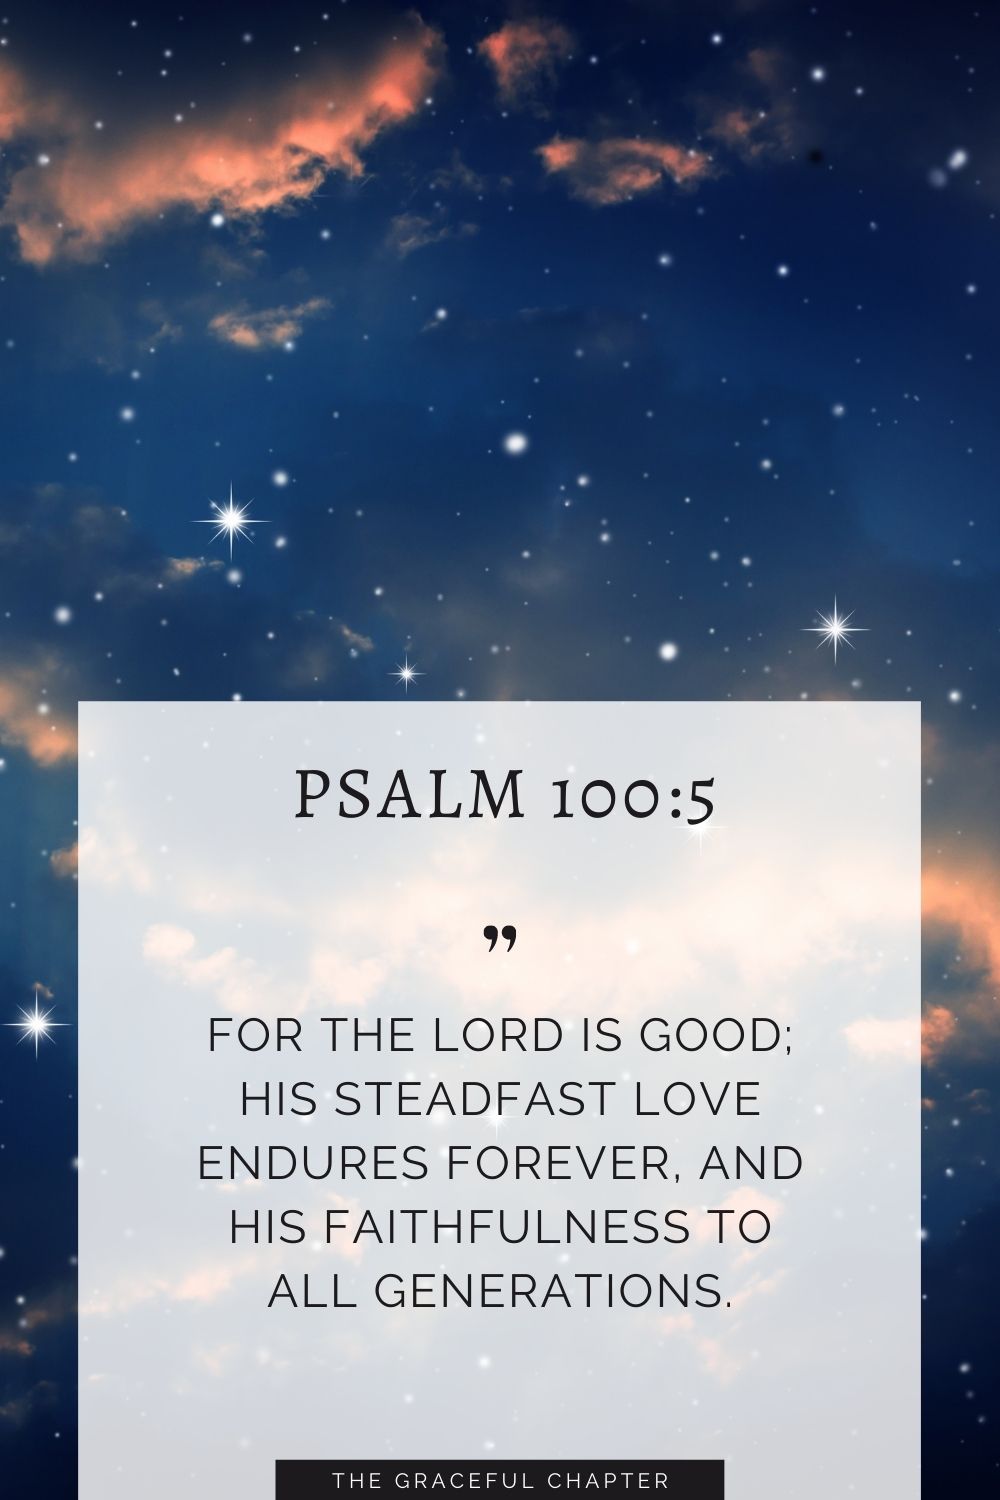 For the Lord is good; his steadfast love endures forever, and his faithfulness to all generations. Psalm 100:5